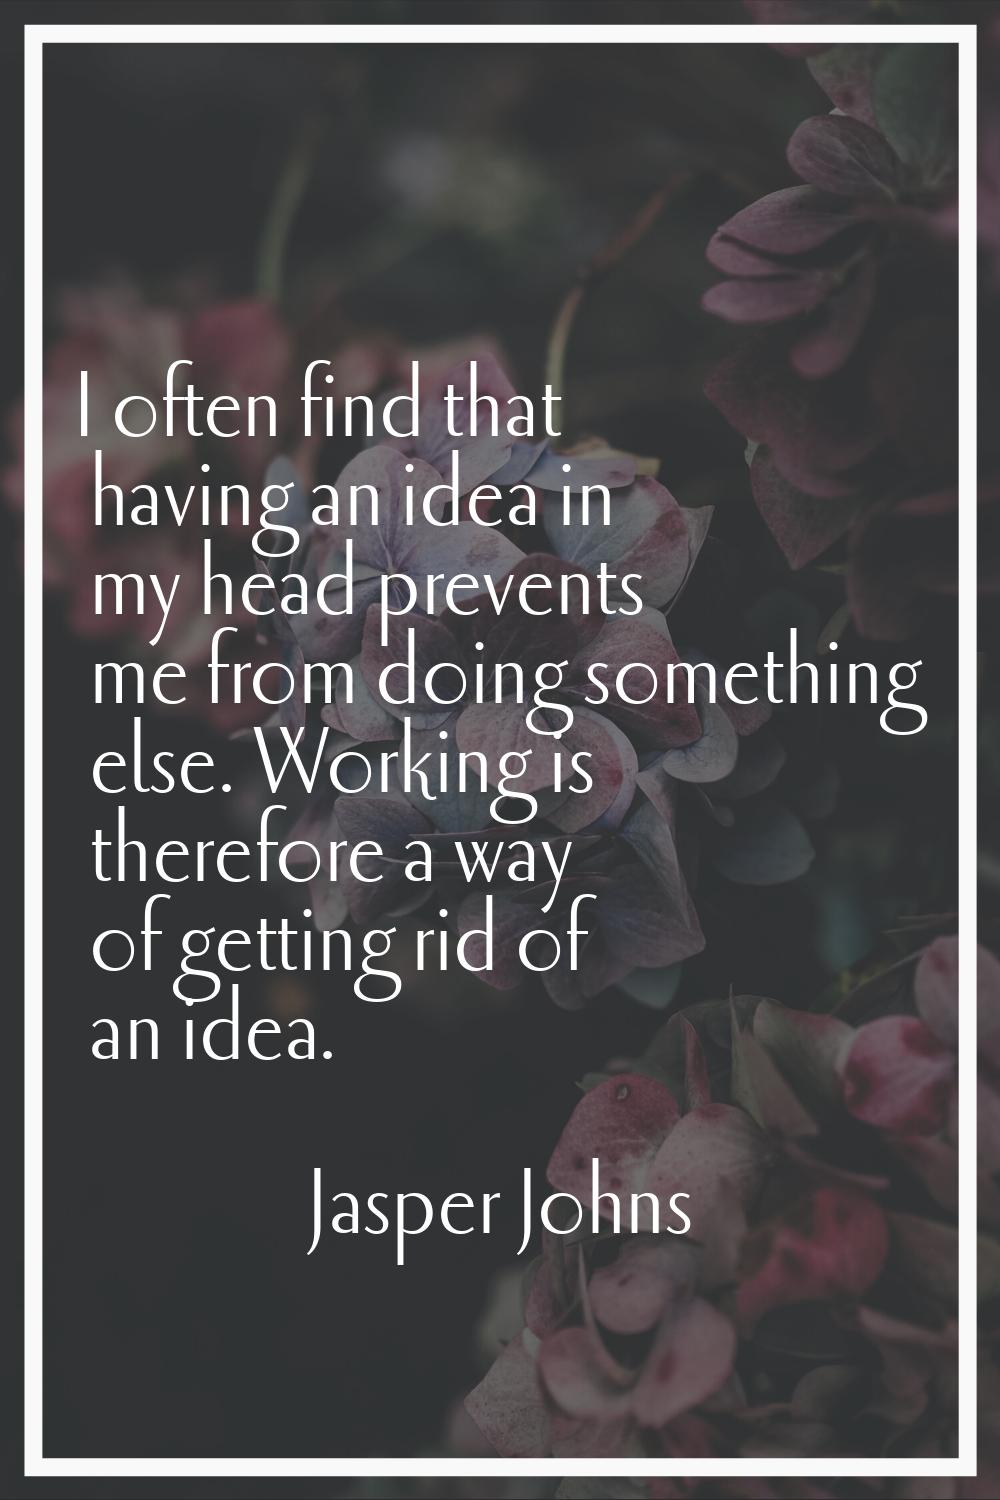 I often find that having an idea in my head prevents me from doing something else. Working is there